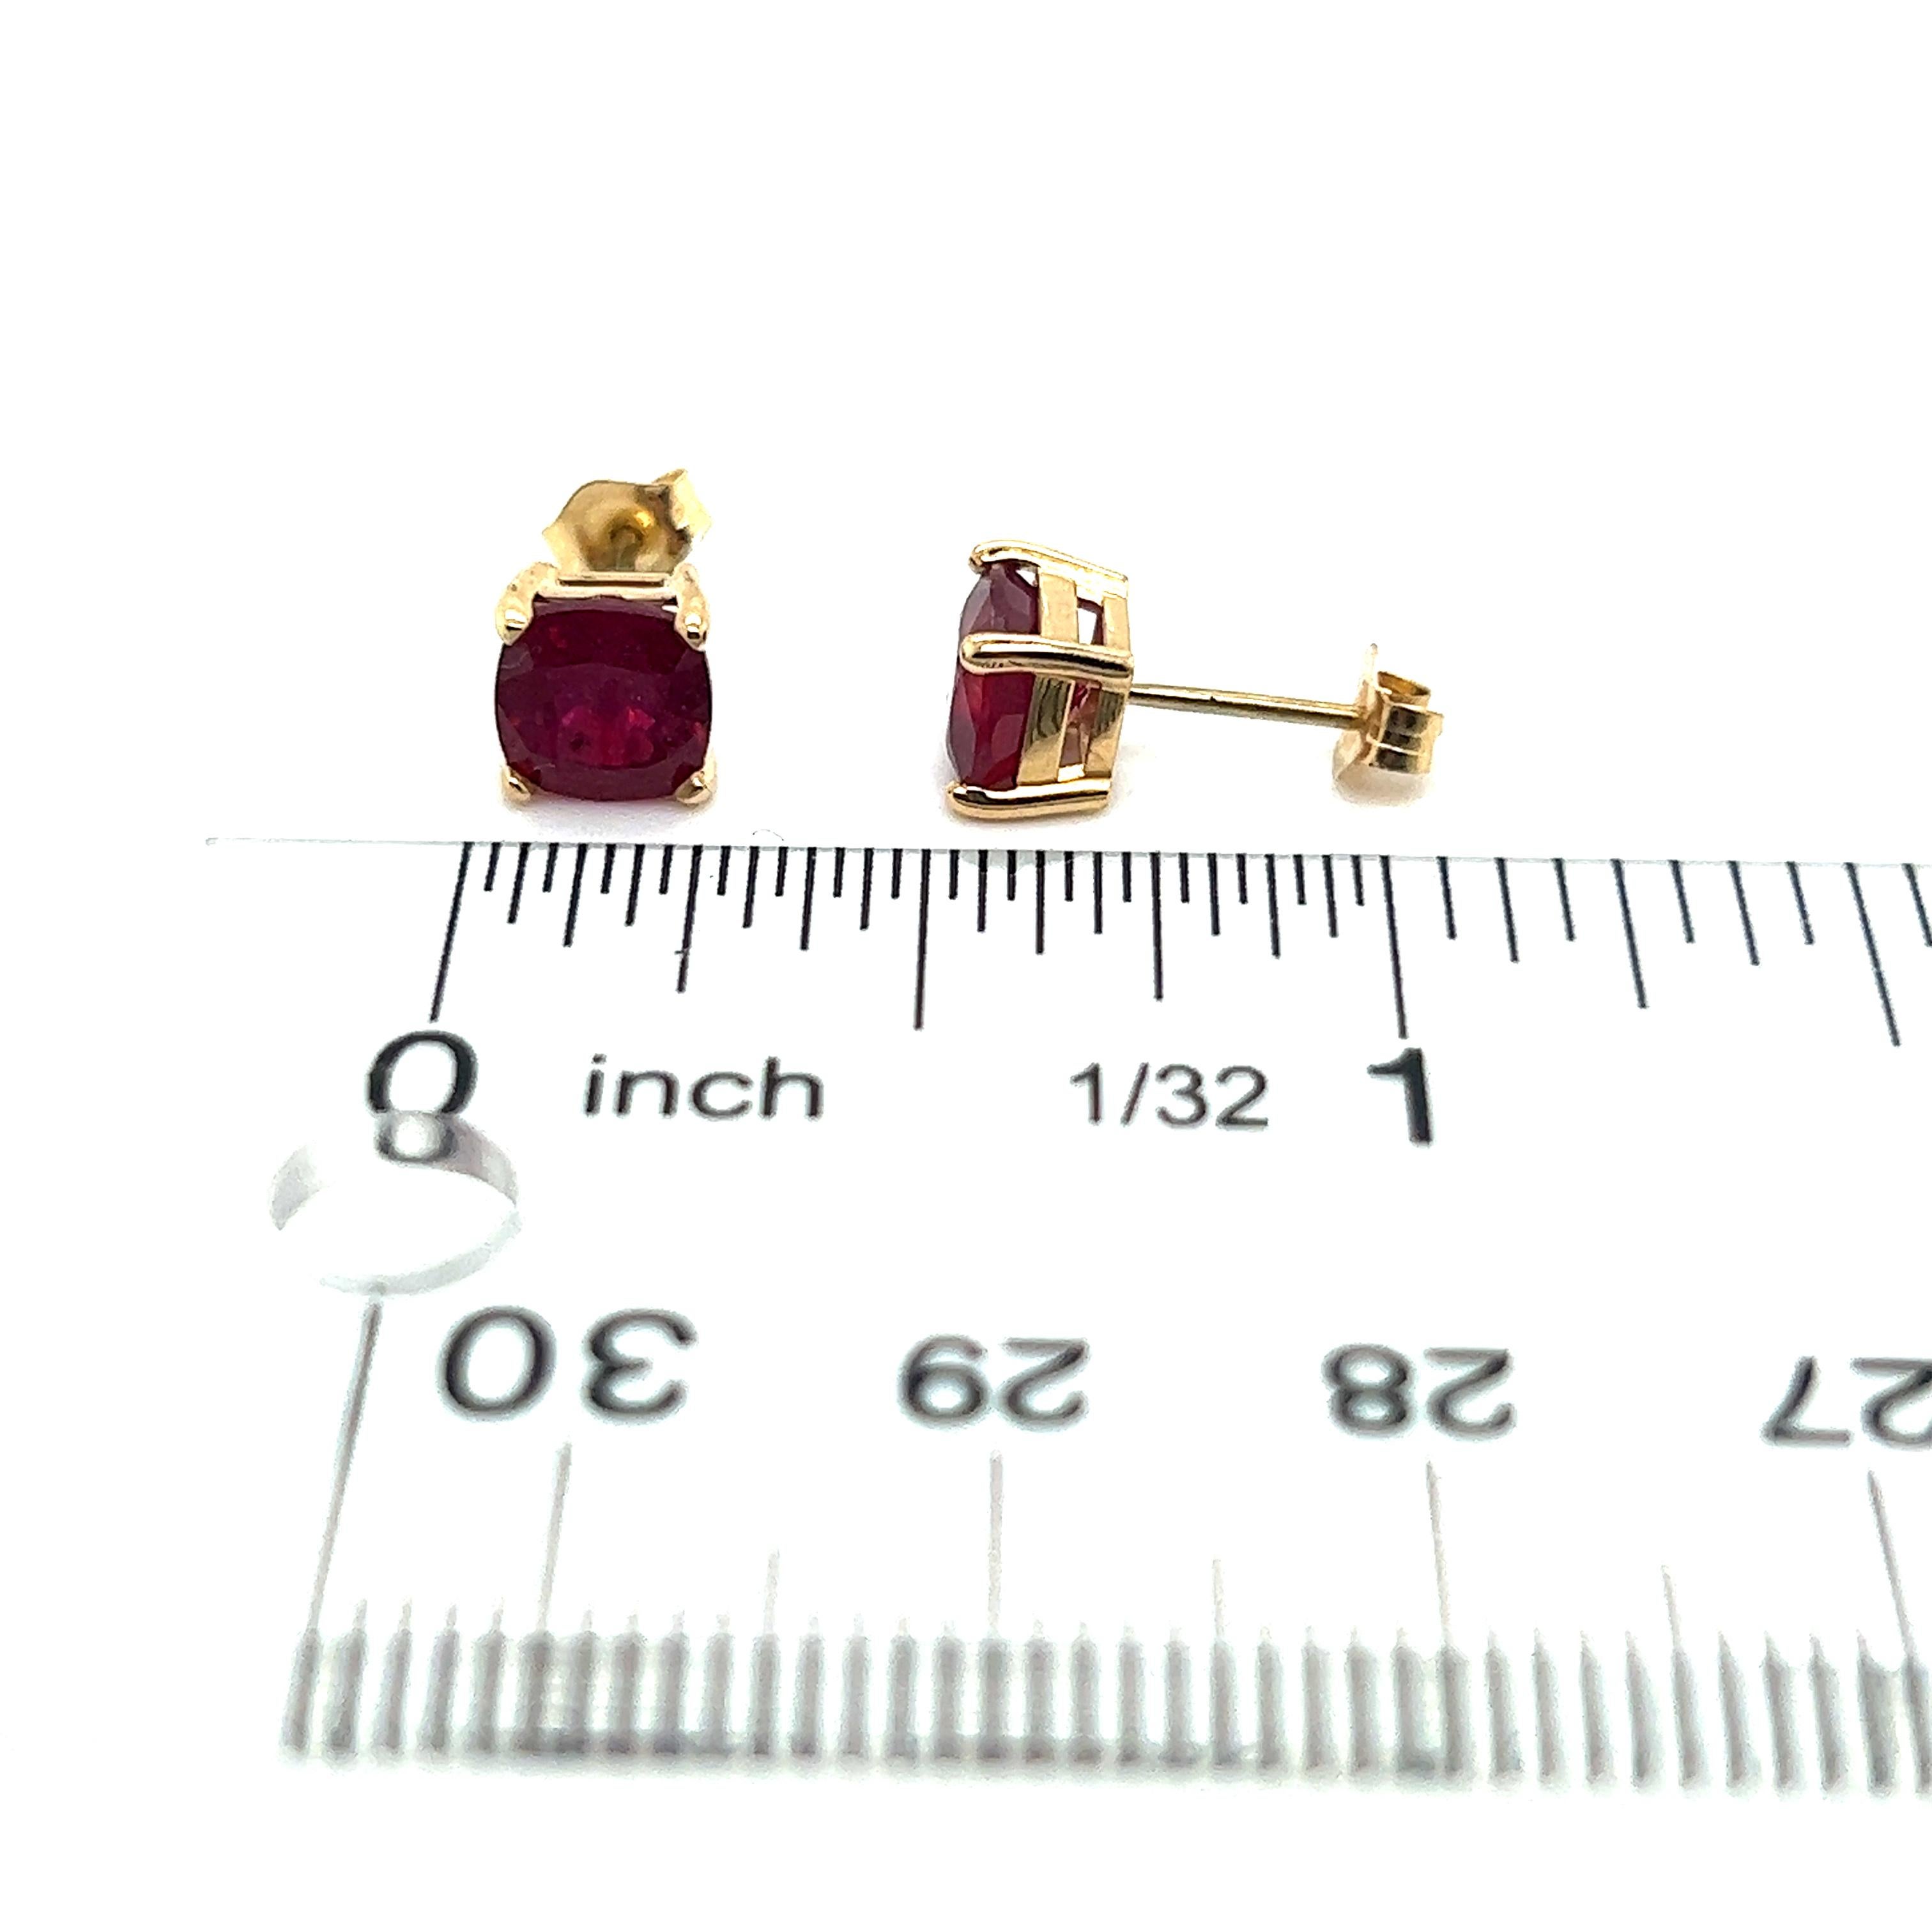 Natural Finely Faceted Quality Composite Ruby Stud Earrings 14k Yellow Gold 3.15 TW Certified $499 307912

This is a Unique Custom Made Glamorous Piece of Jewelry!

Nothing says, “I Love you” more than Diamonds and Pearls!

These Ruby earrings have